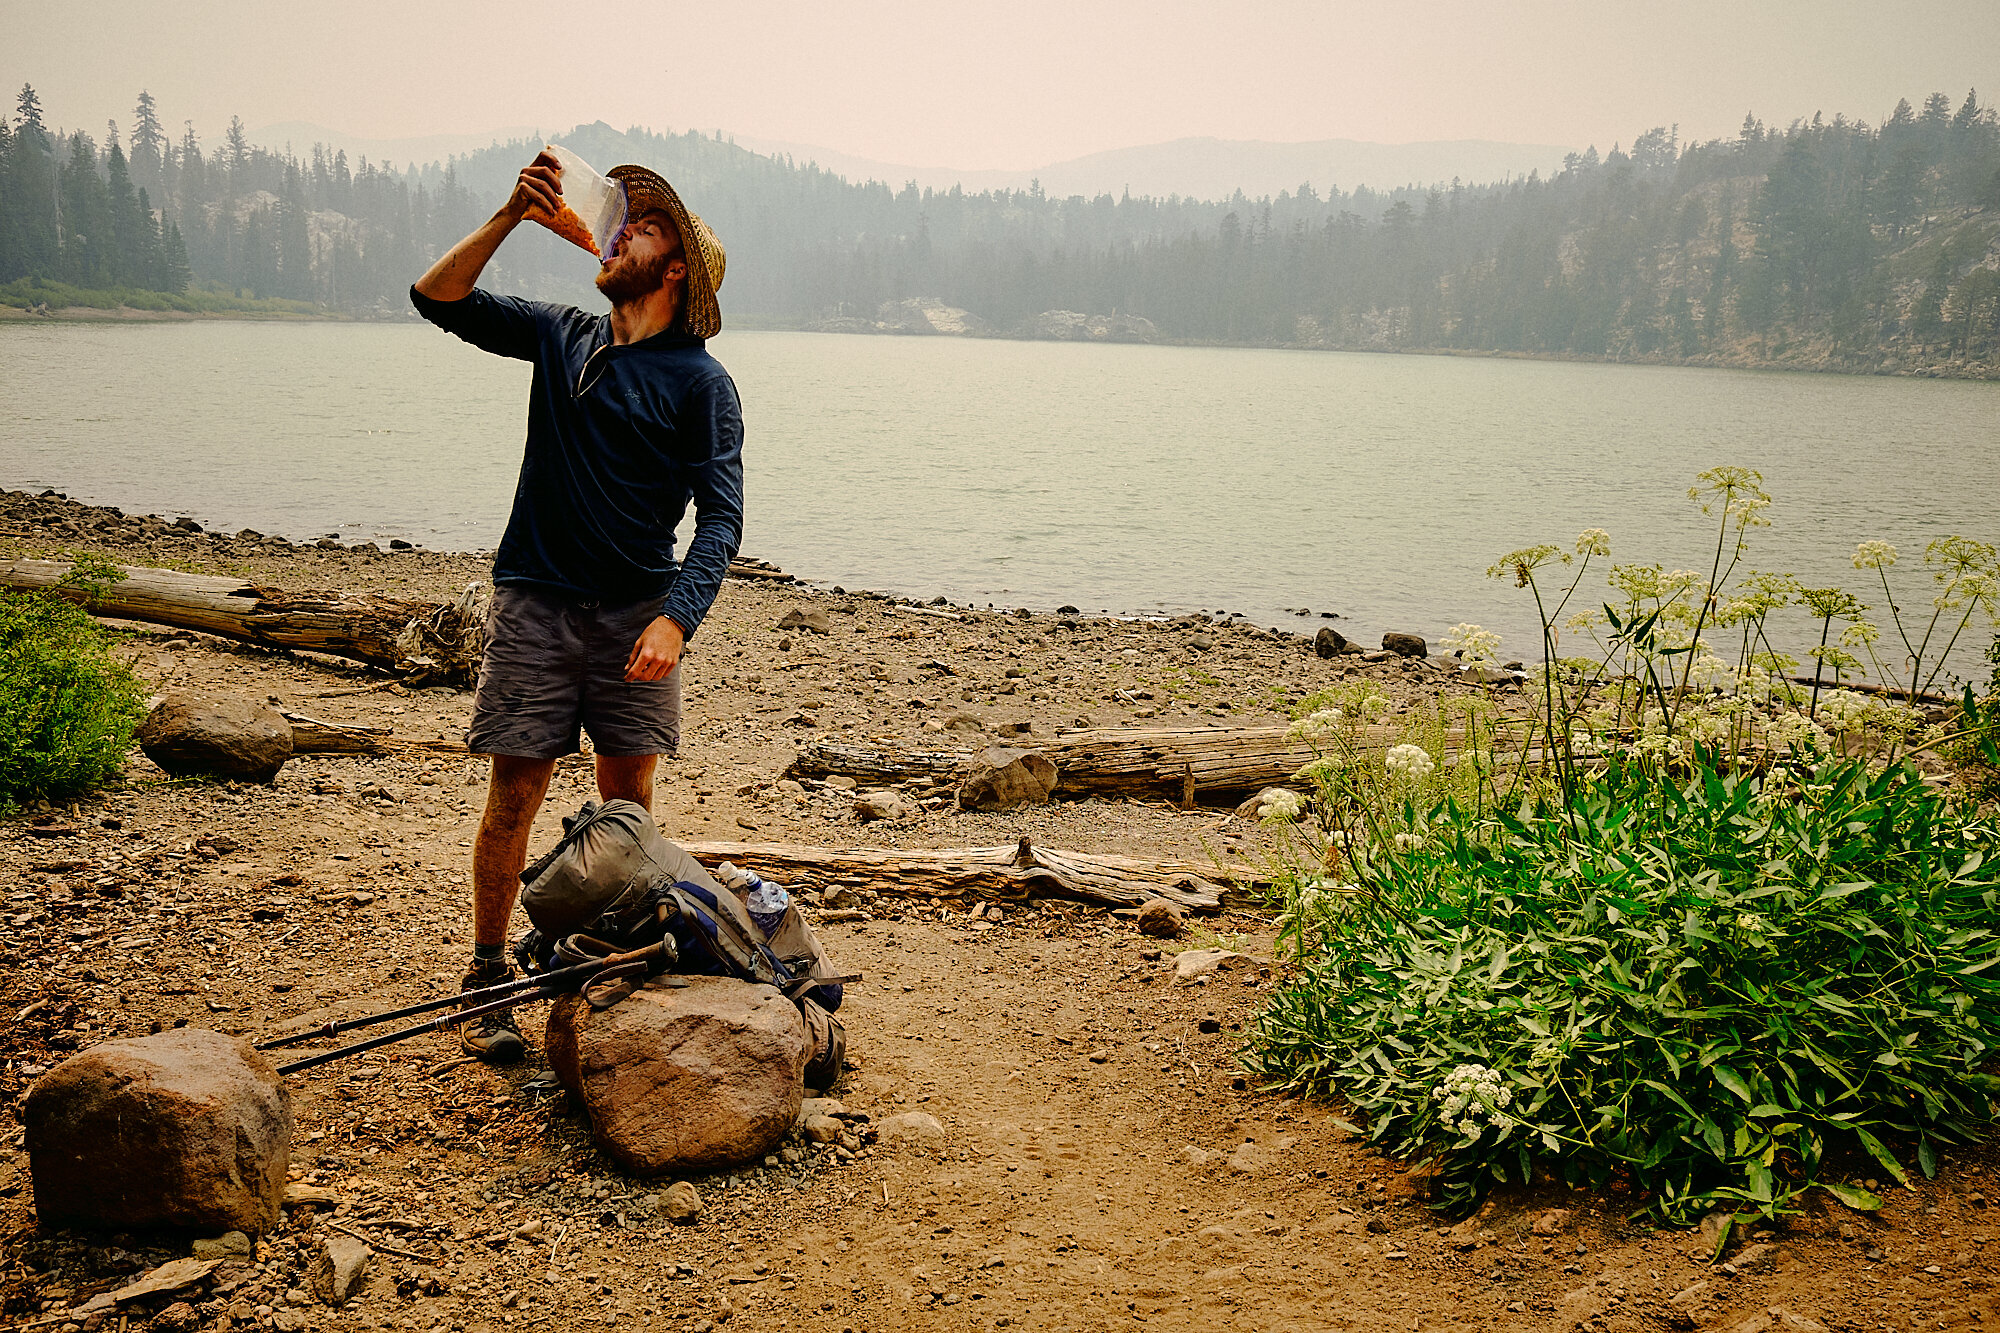  Lebowski grabs a quick snack on the shore of Round Lake before parting ways. The smoke had been building for days and made for quite difficult breathing. | 8/19/20 Big Meadow, CA 